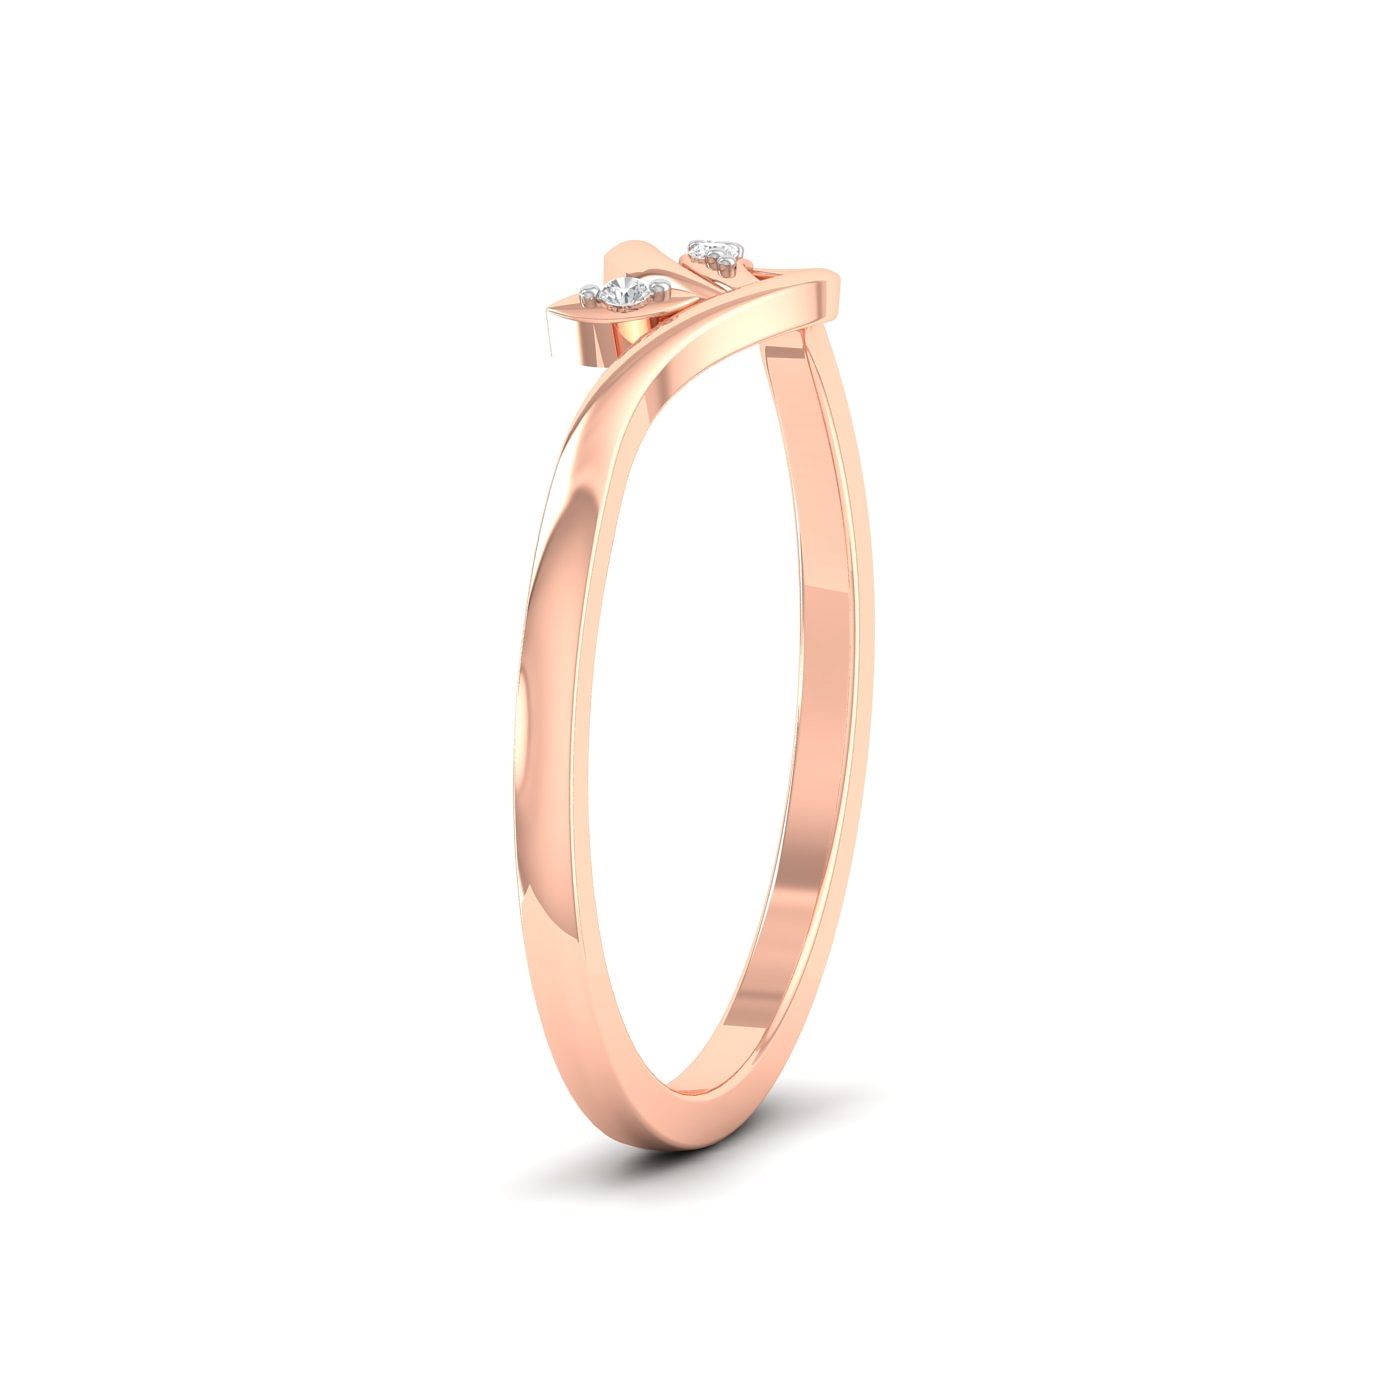 Light weight rose gold Appy Three Stone Diamond Ring for her